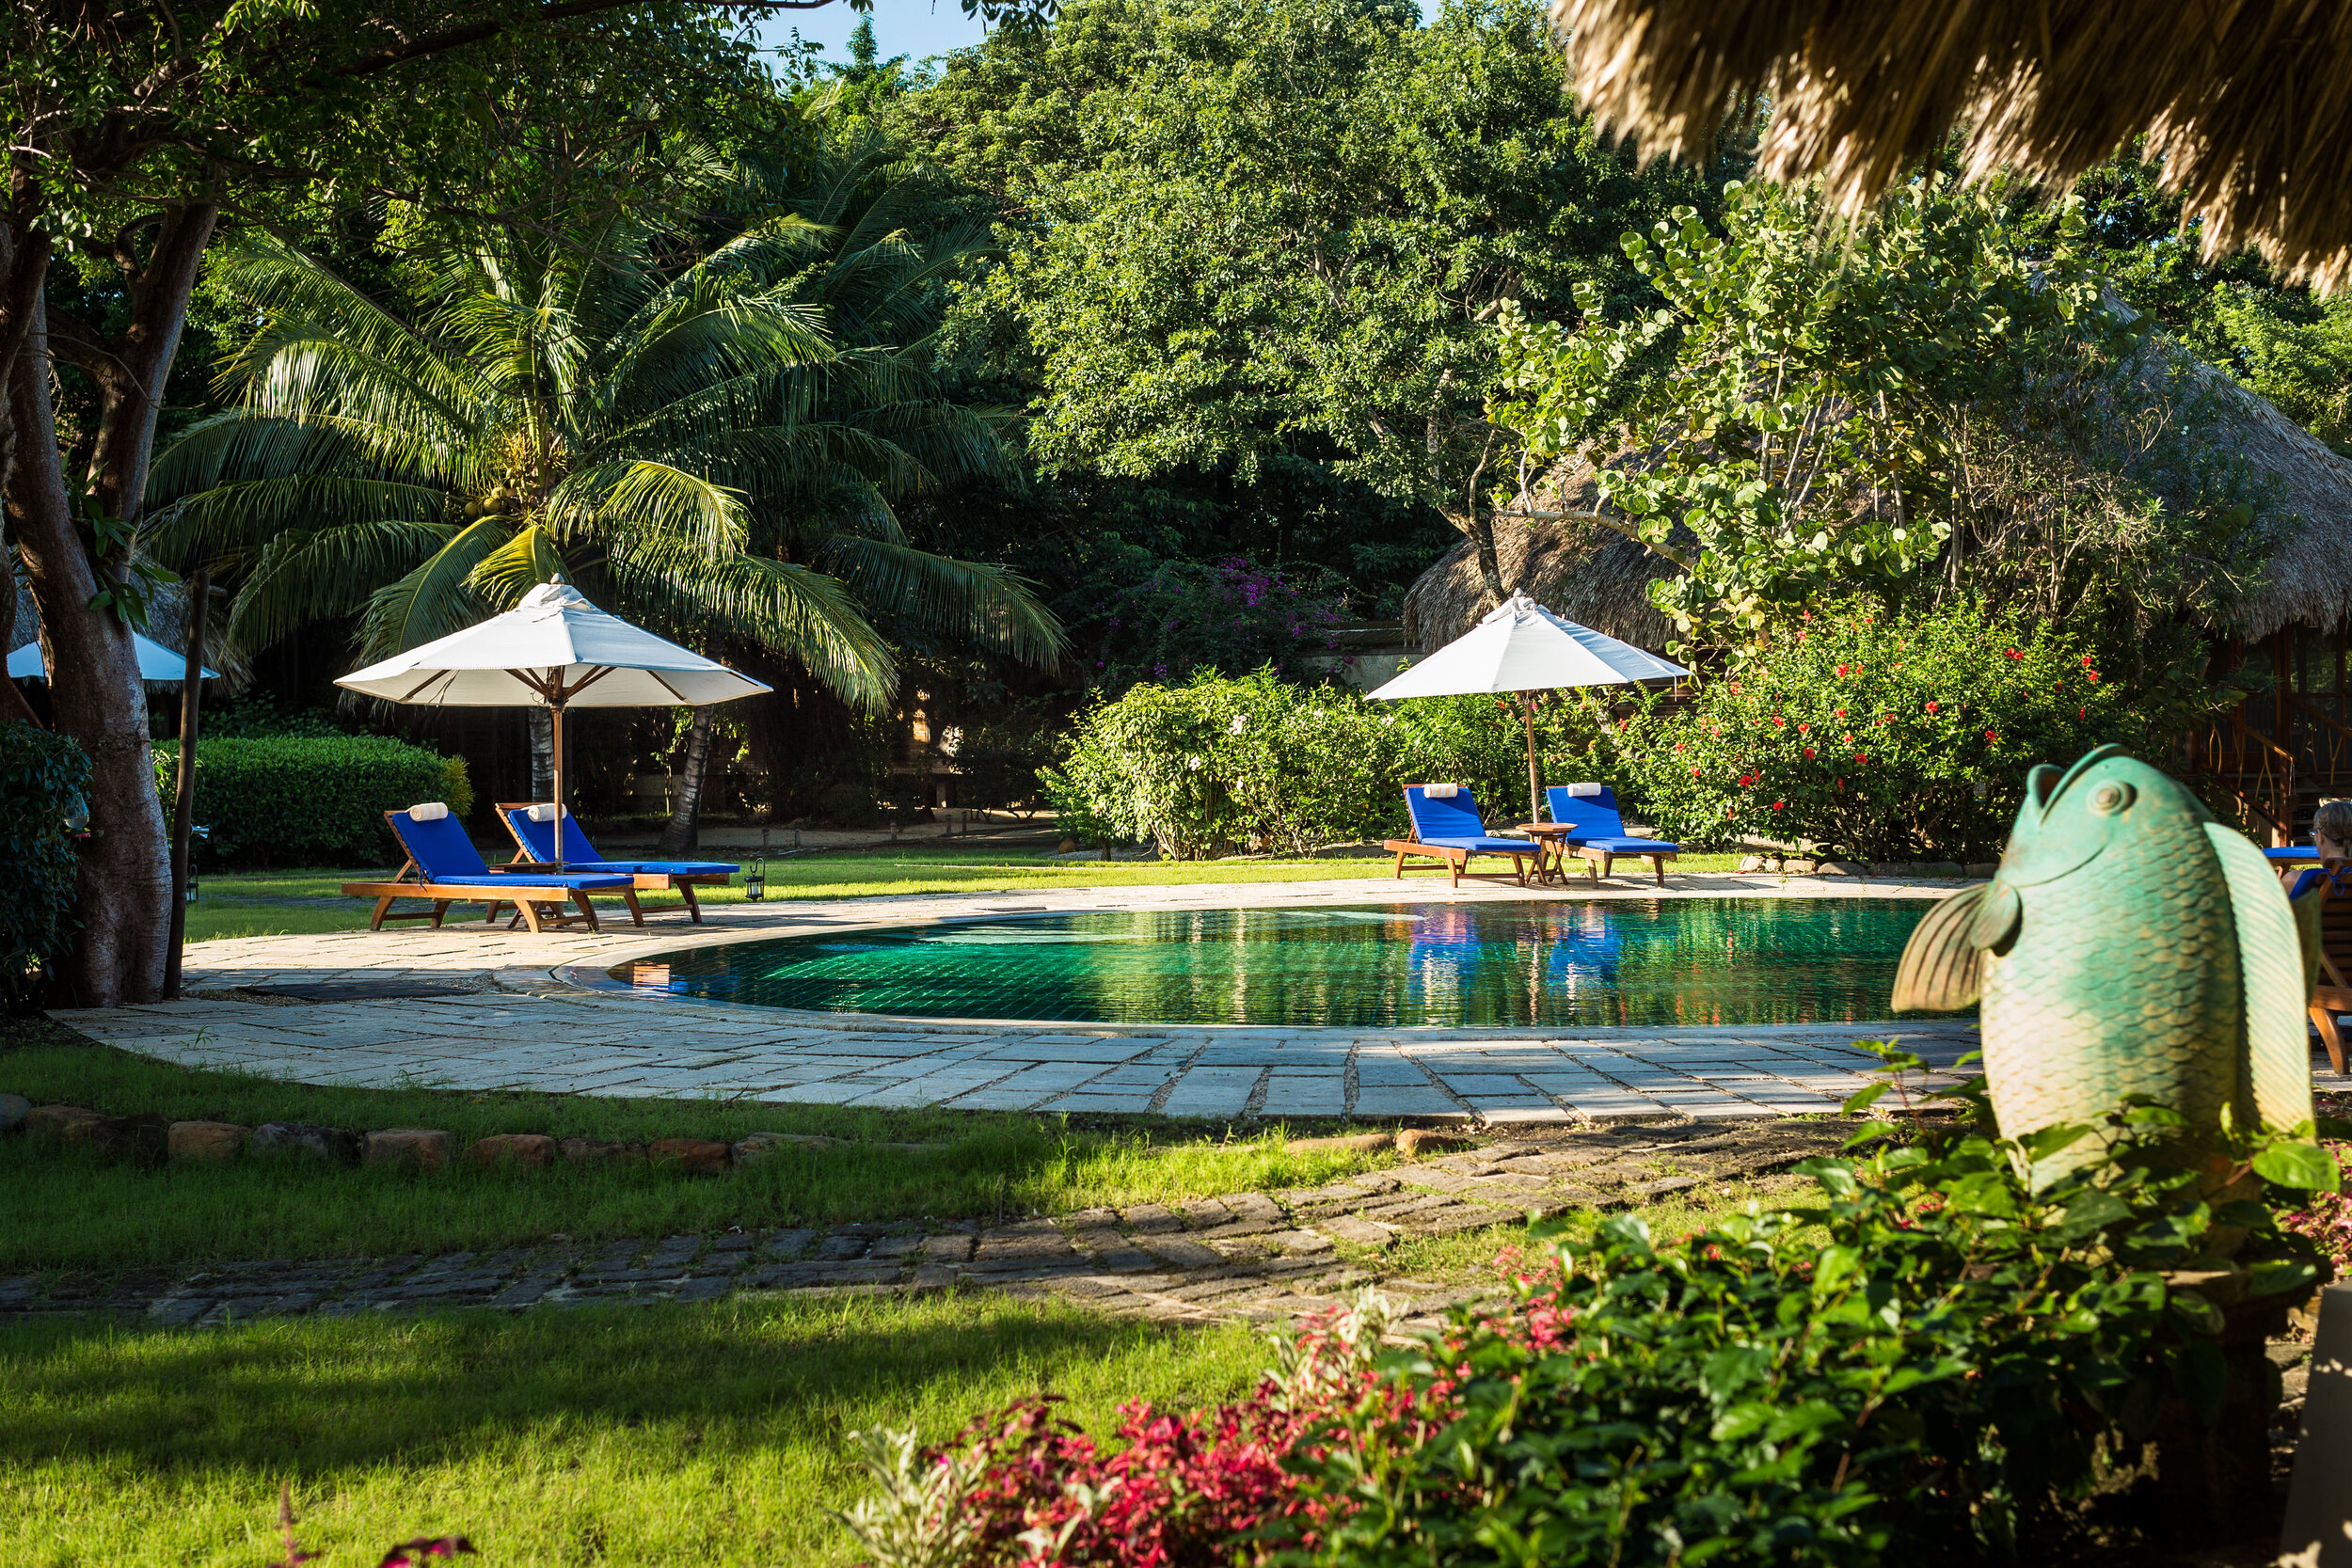   One of the pools at Turtle Inn (photo credit: The Family Coppola Hideaways)  